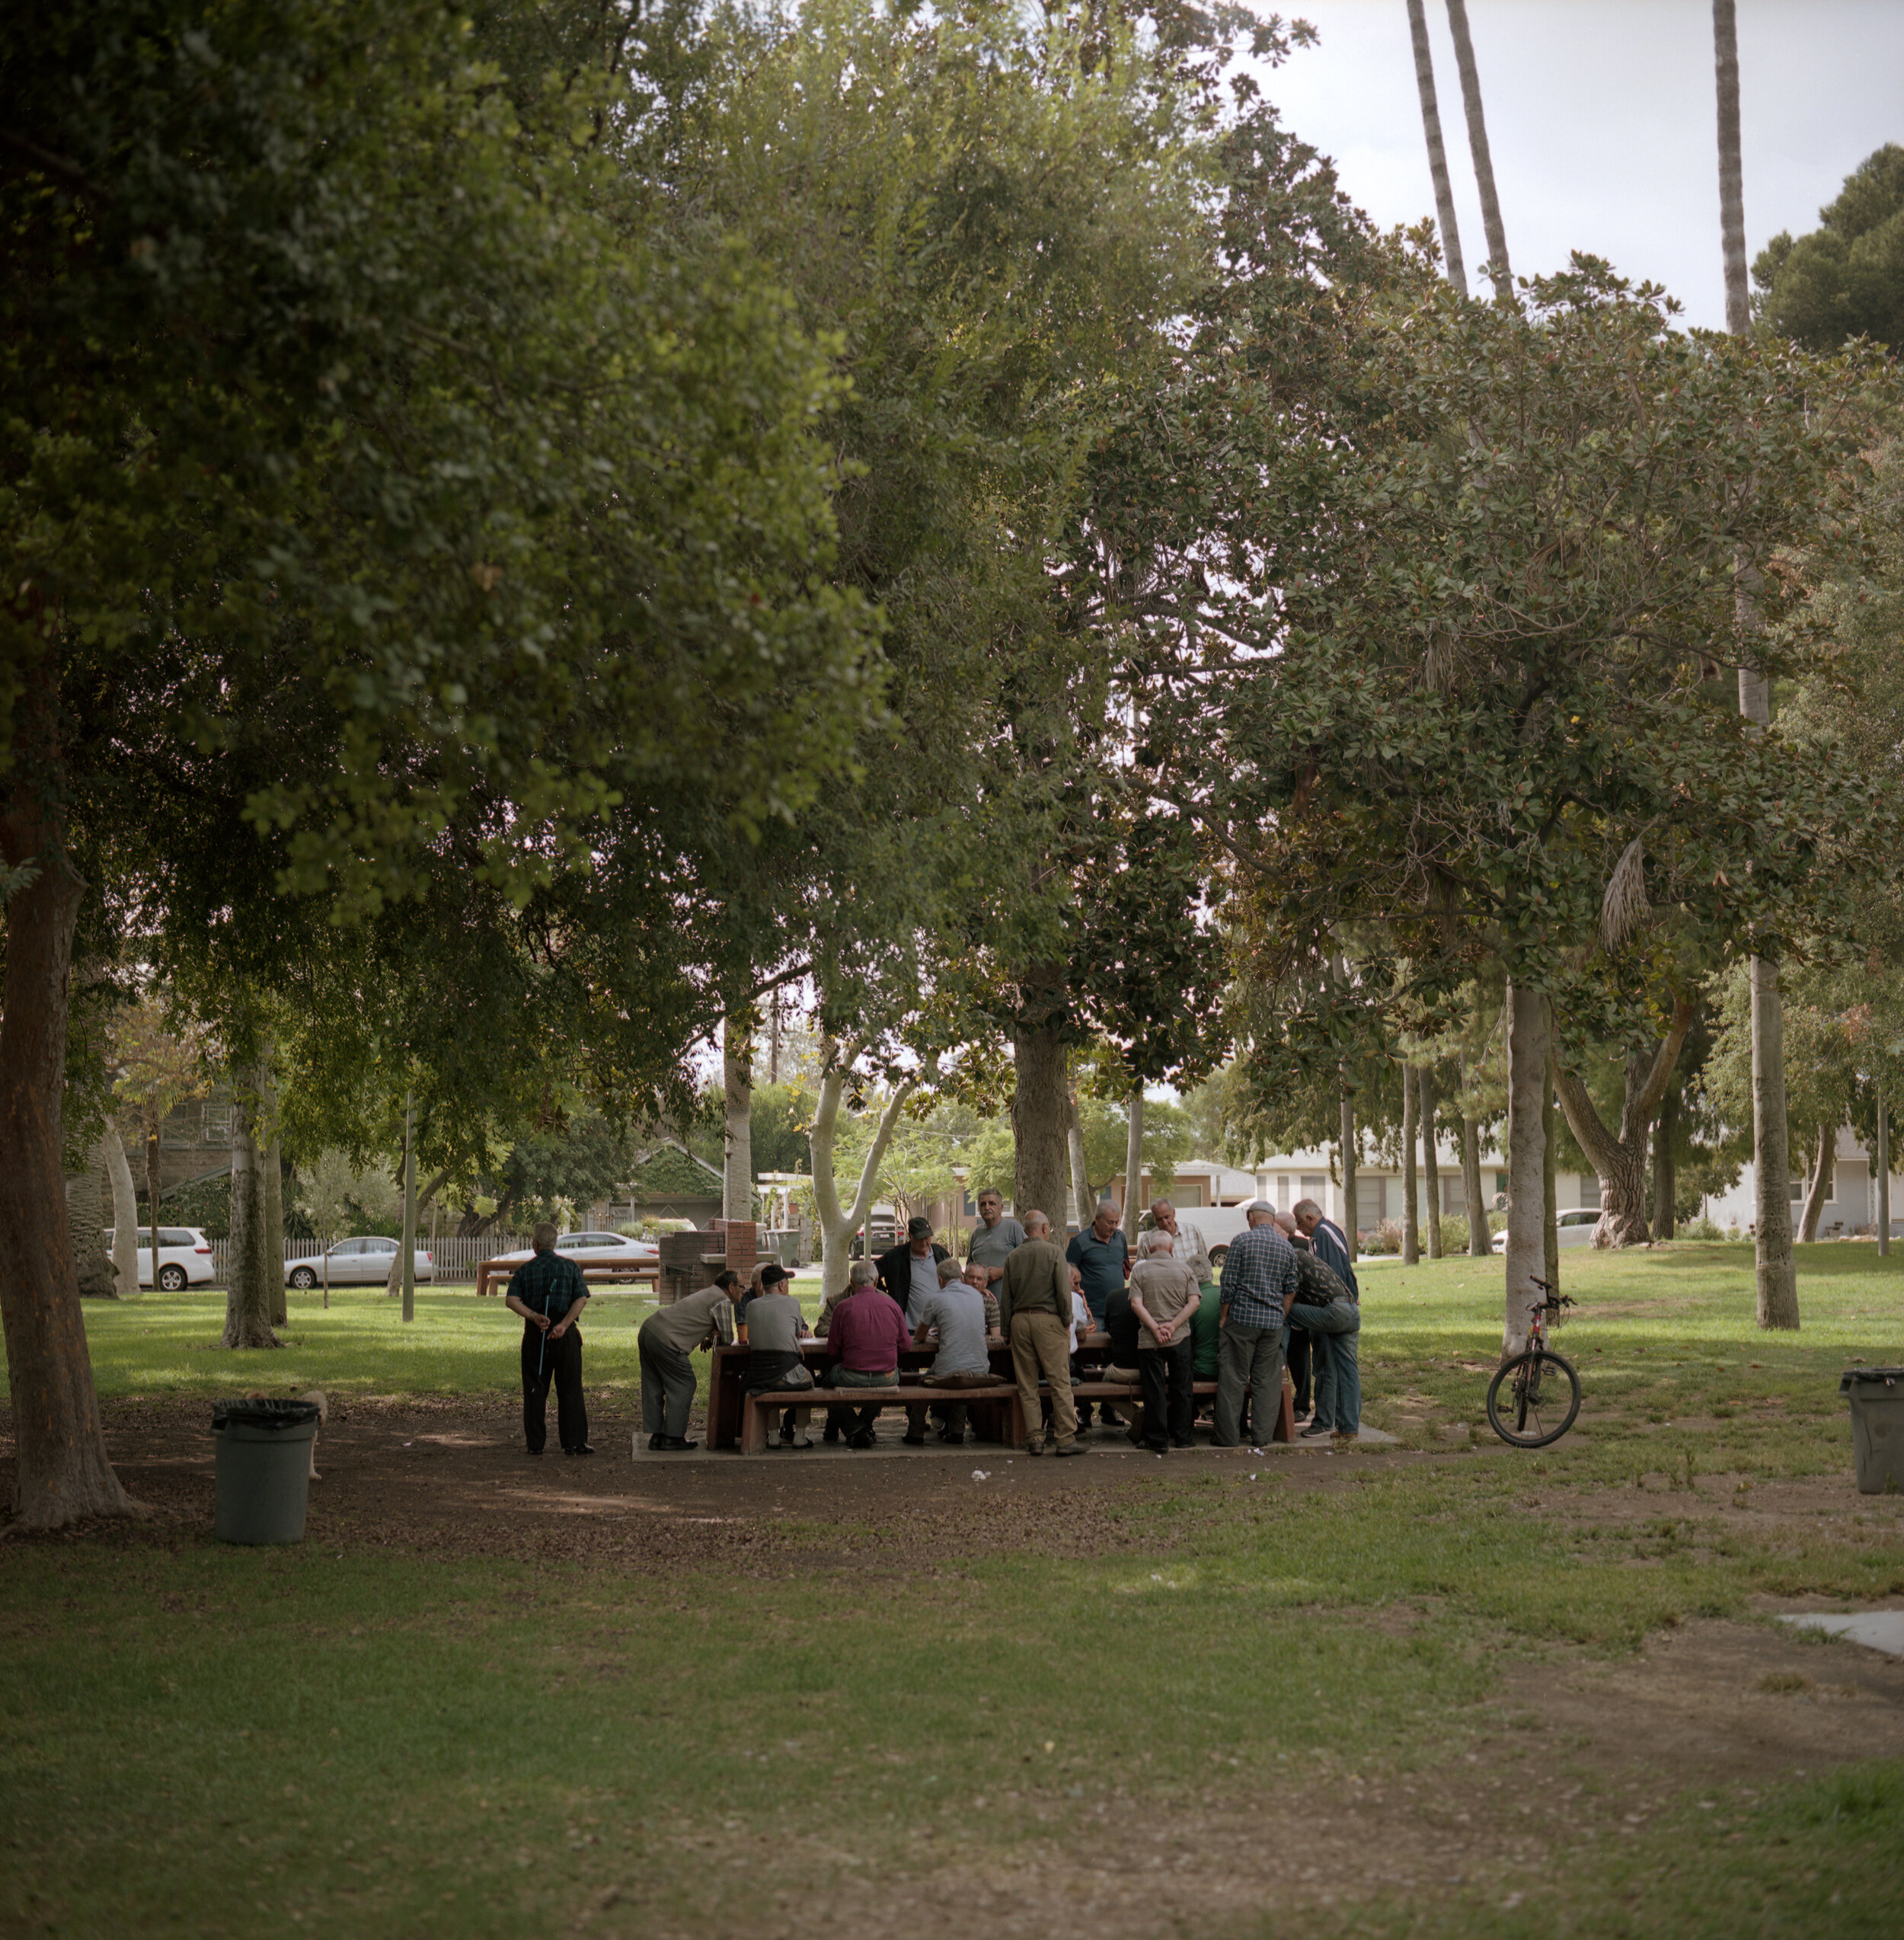  A group of Armenian Americans play backgammon at Fremont Park. Over the years, the park has served as a gathering space for many old Armenian men to play games, barbecue, and spend the afternoon together.  